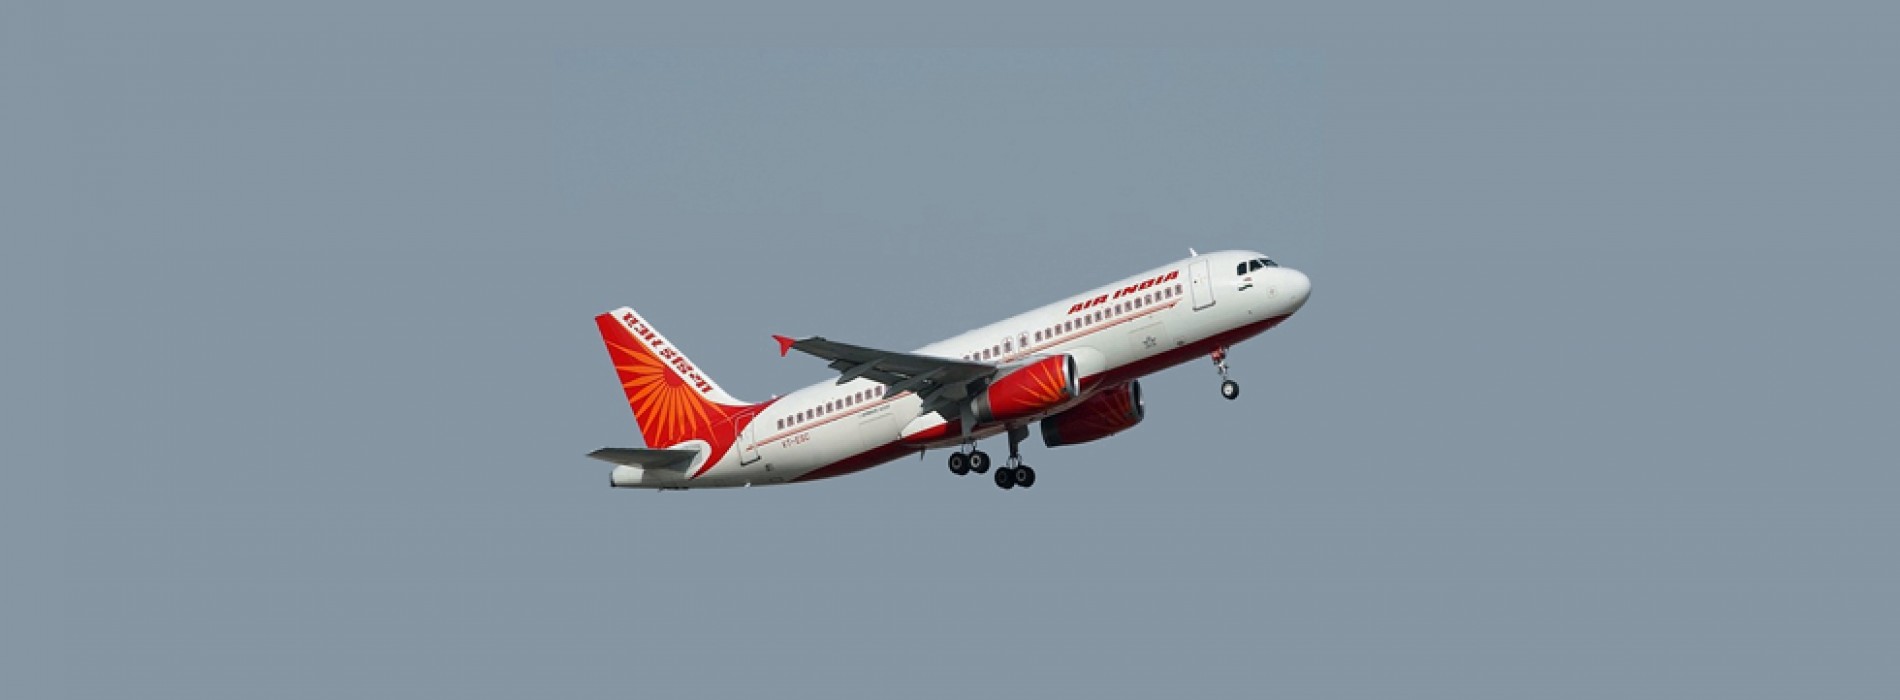 Air India’s projected net loss for 2017-18 less than 2016-17